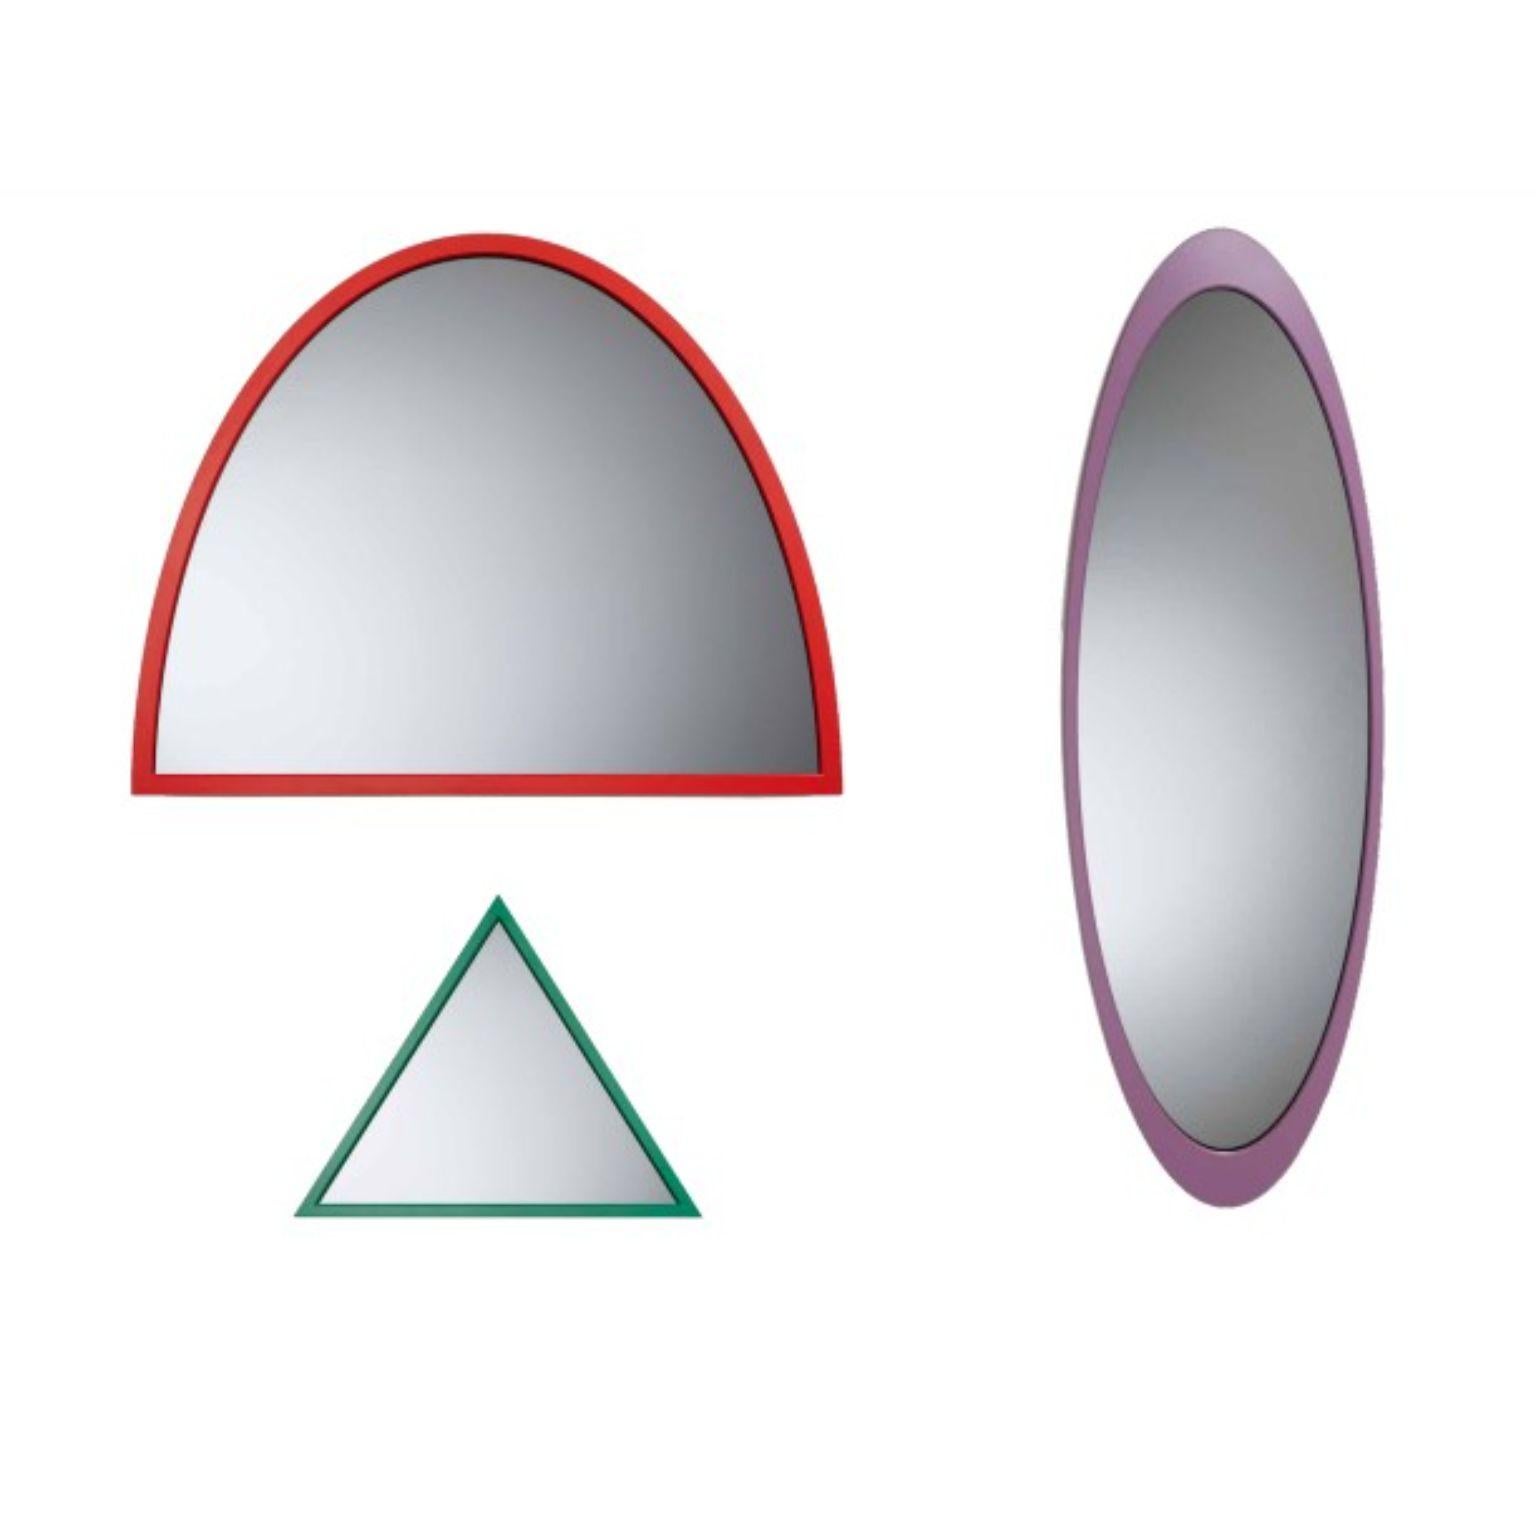 Set of 3 mirooo mirrors by Moure Studio
Dimensions: D 140 x H 45 cm // D 100 x H 80.5 cm // D 60 x W 57 x H 57 cm
Materials: Smoked glass and steel

3 mirrors in grey smoked glass and coloured steel in different colours.
Together, these mirrors